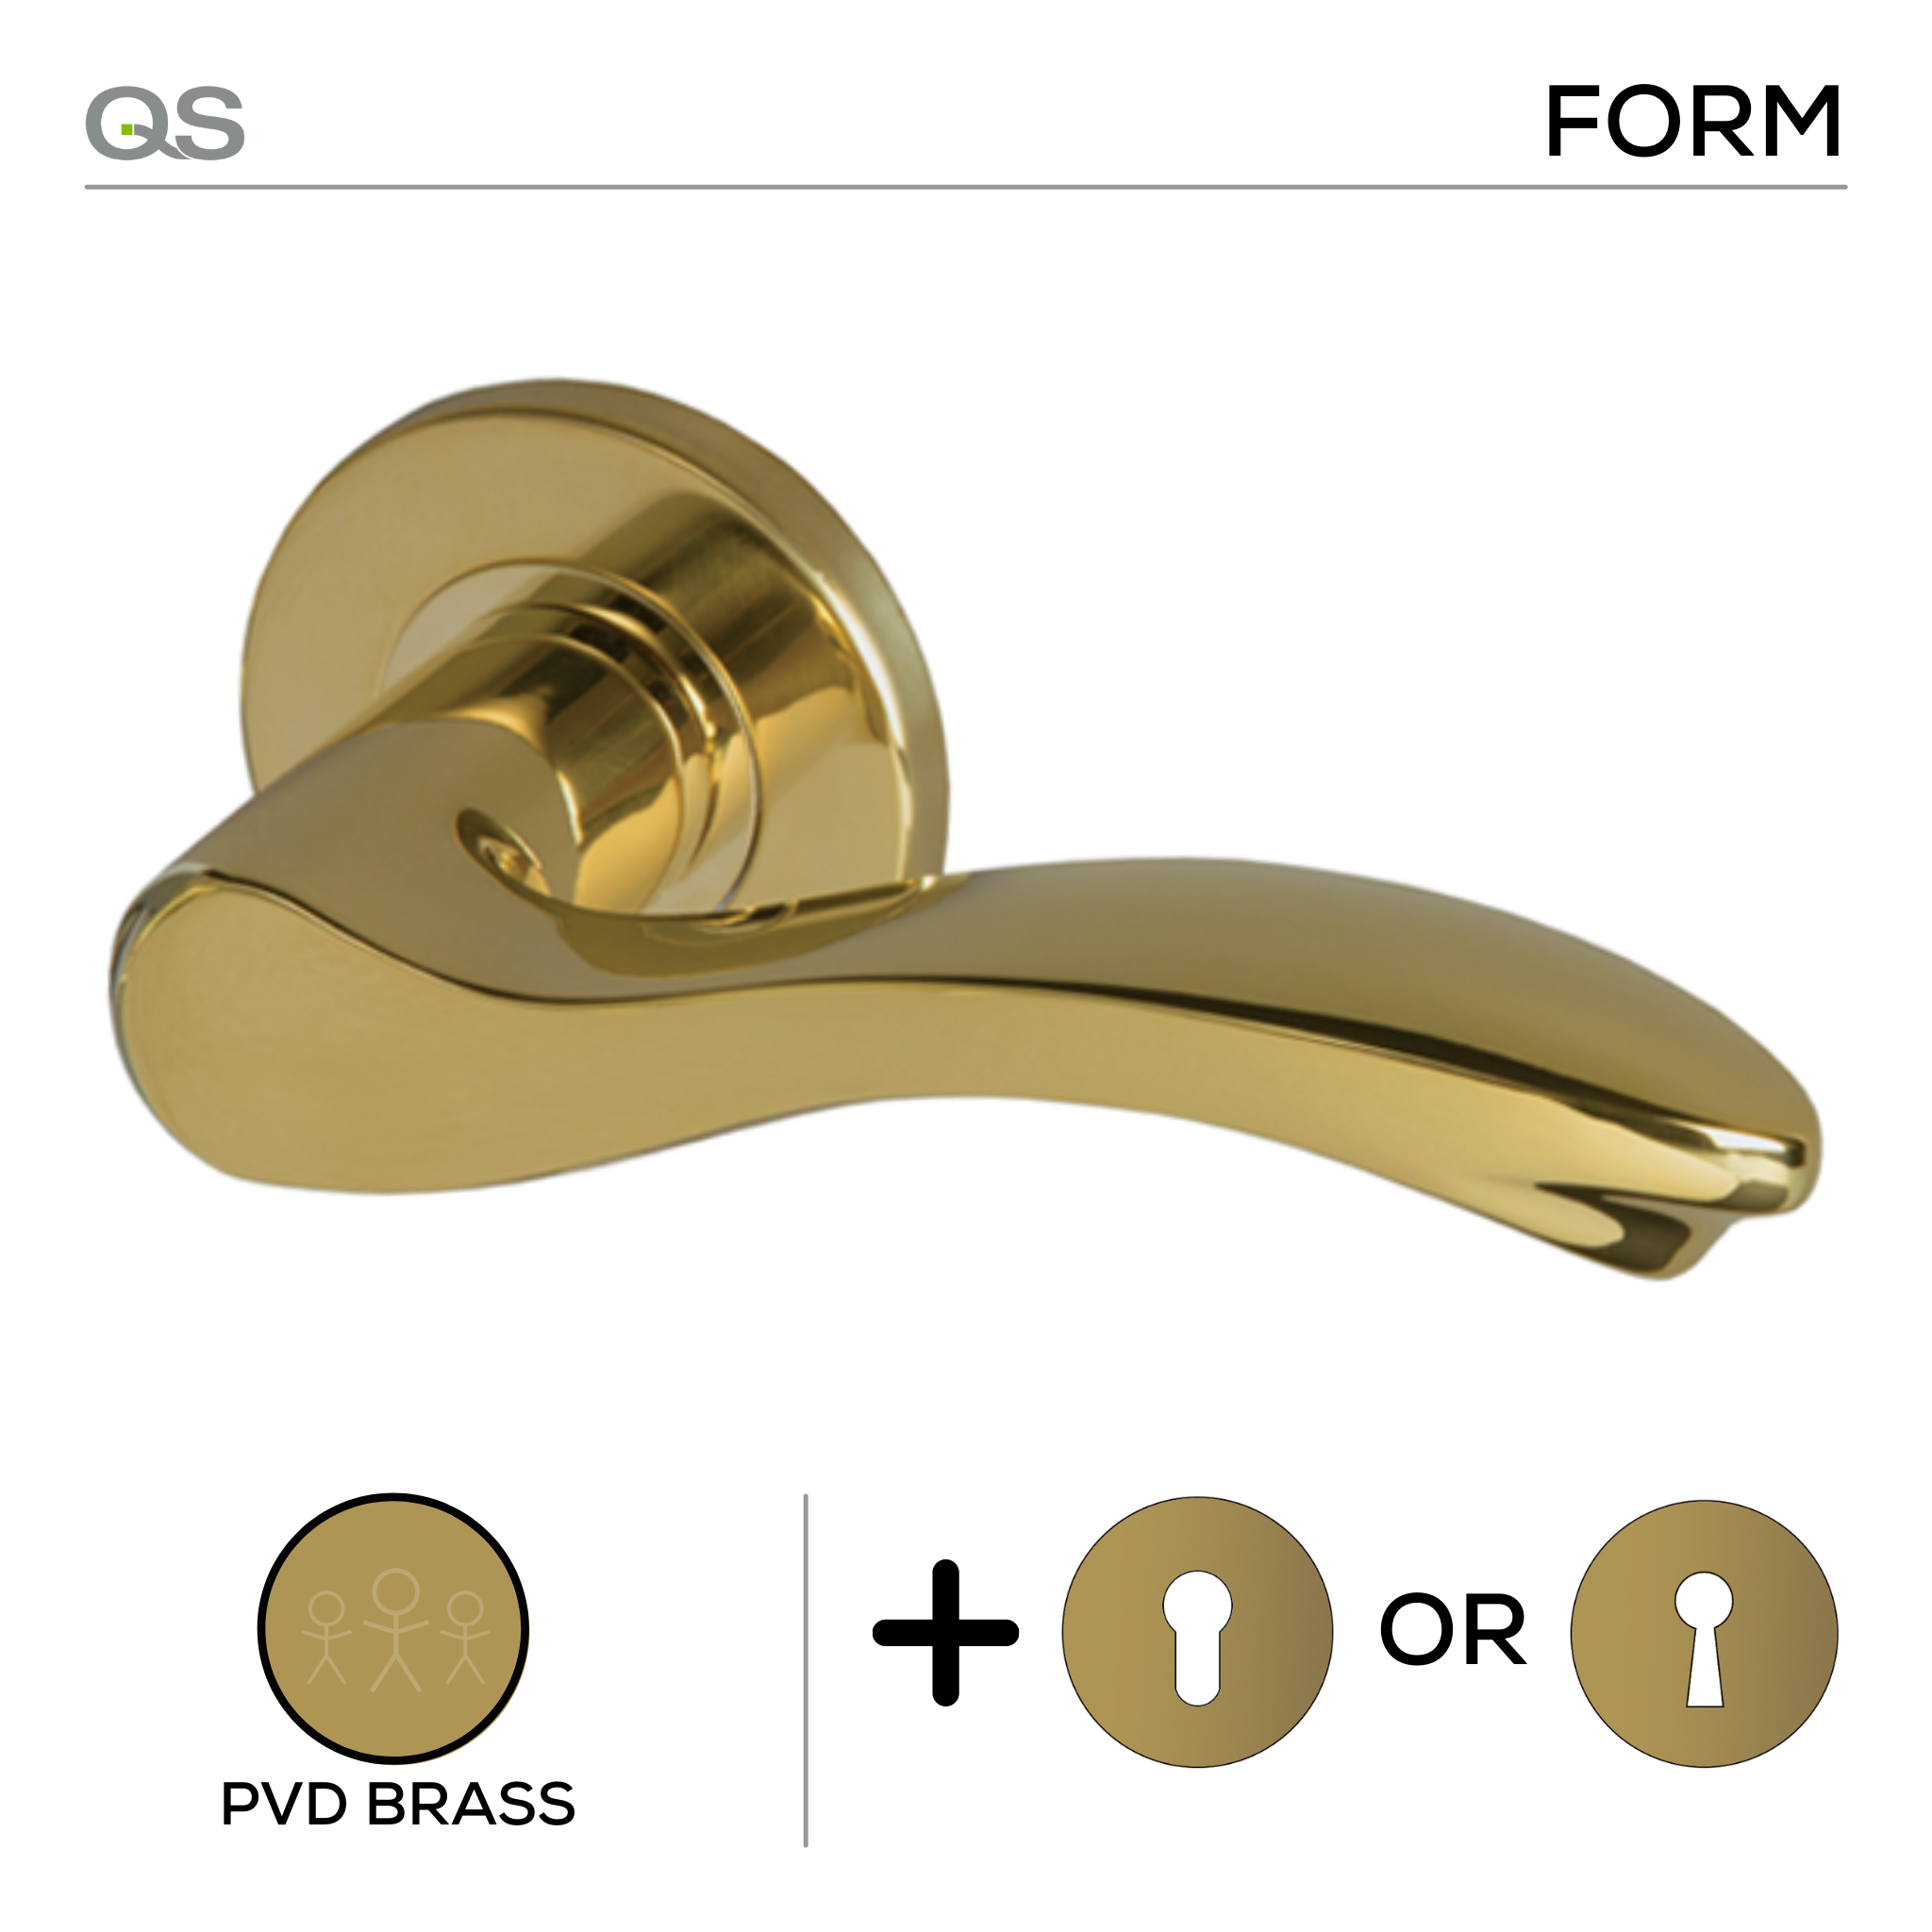 Salo PVD, Lever Handles, Form, On Round Rose, With Escutcheons, PVD Brass, QS